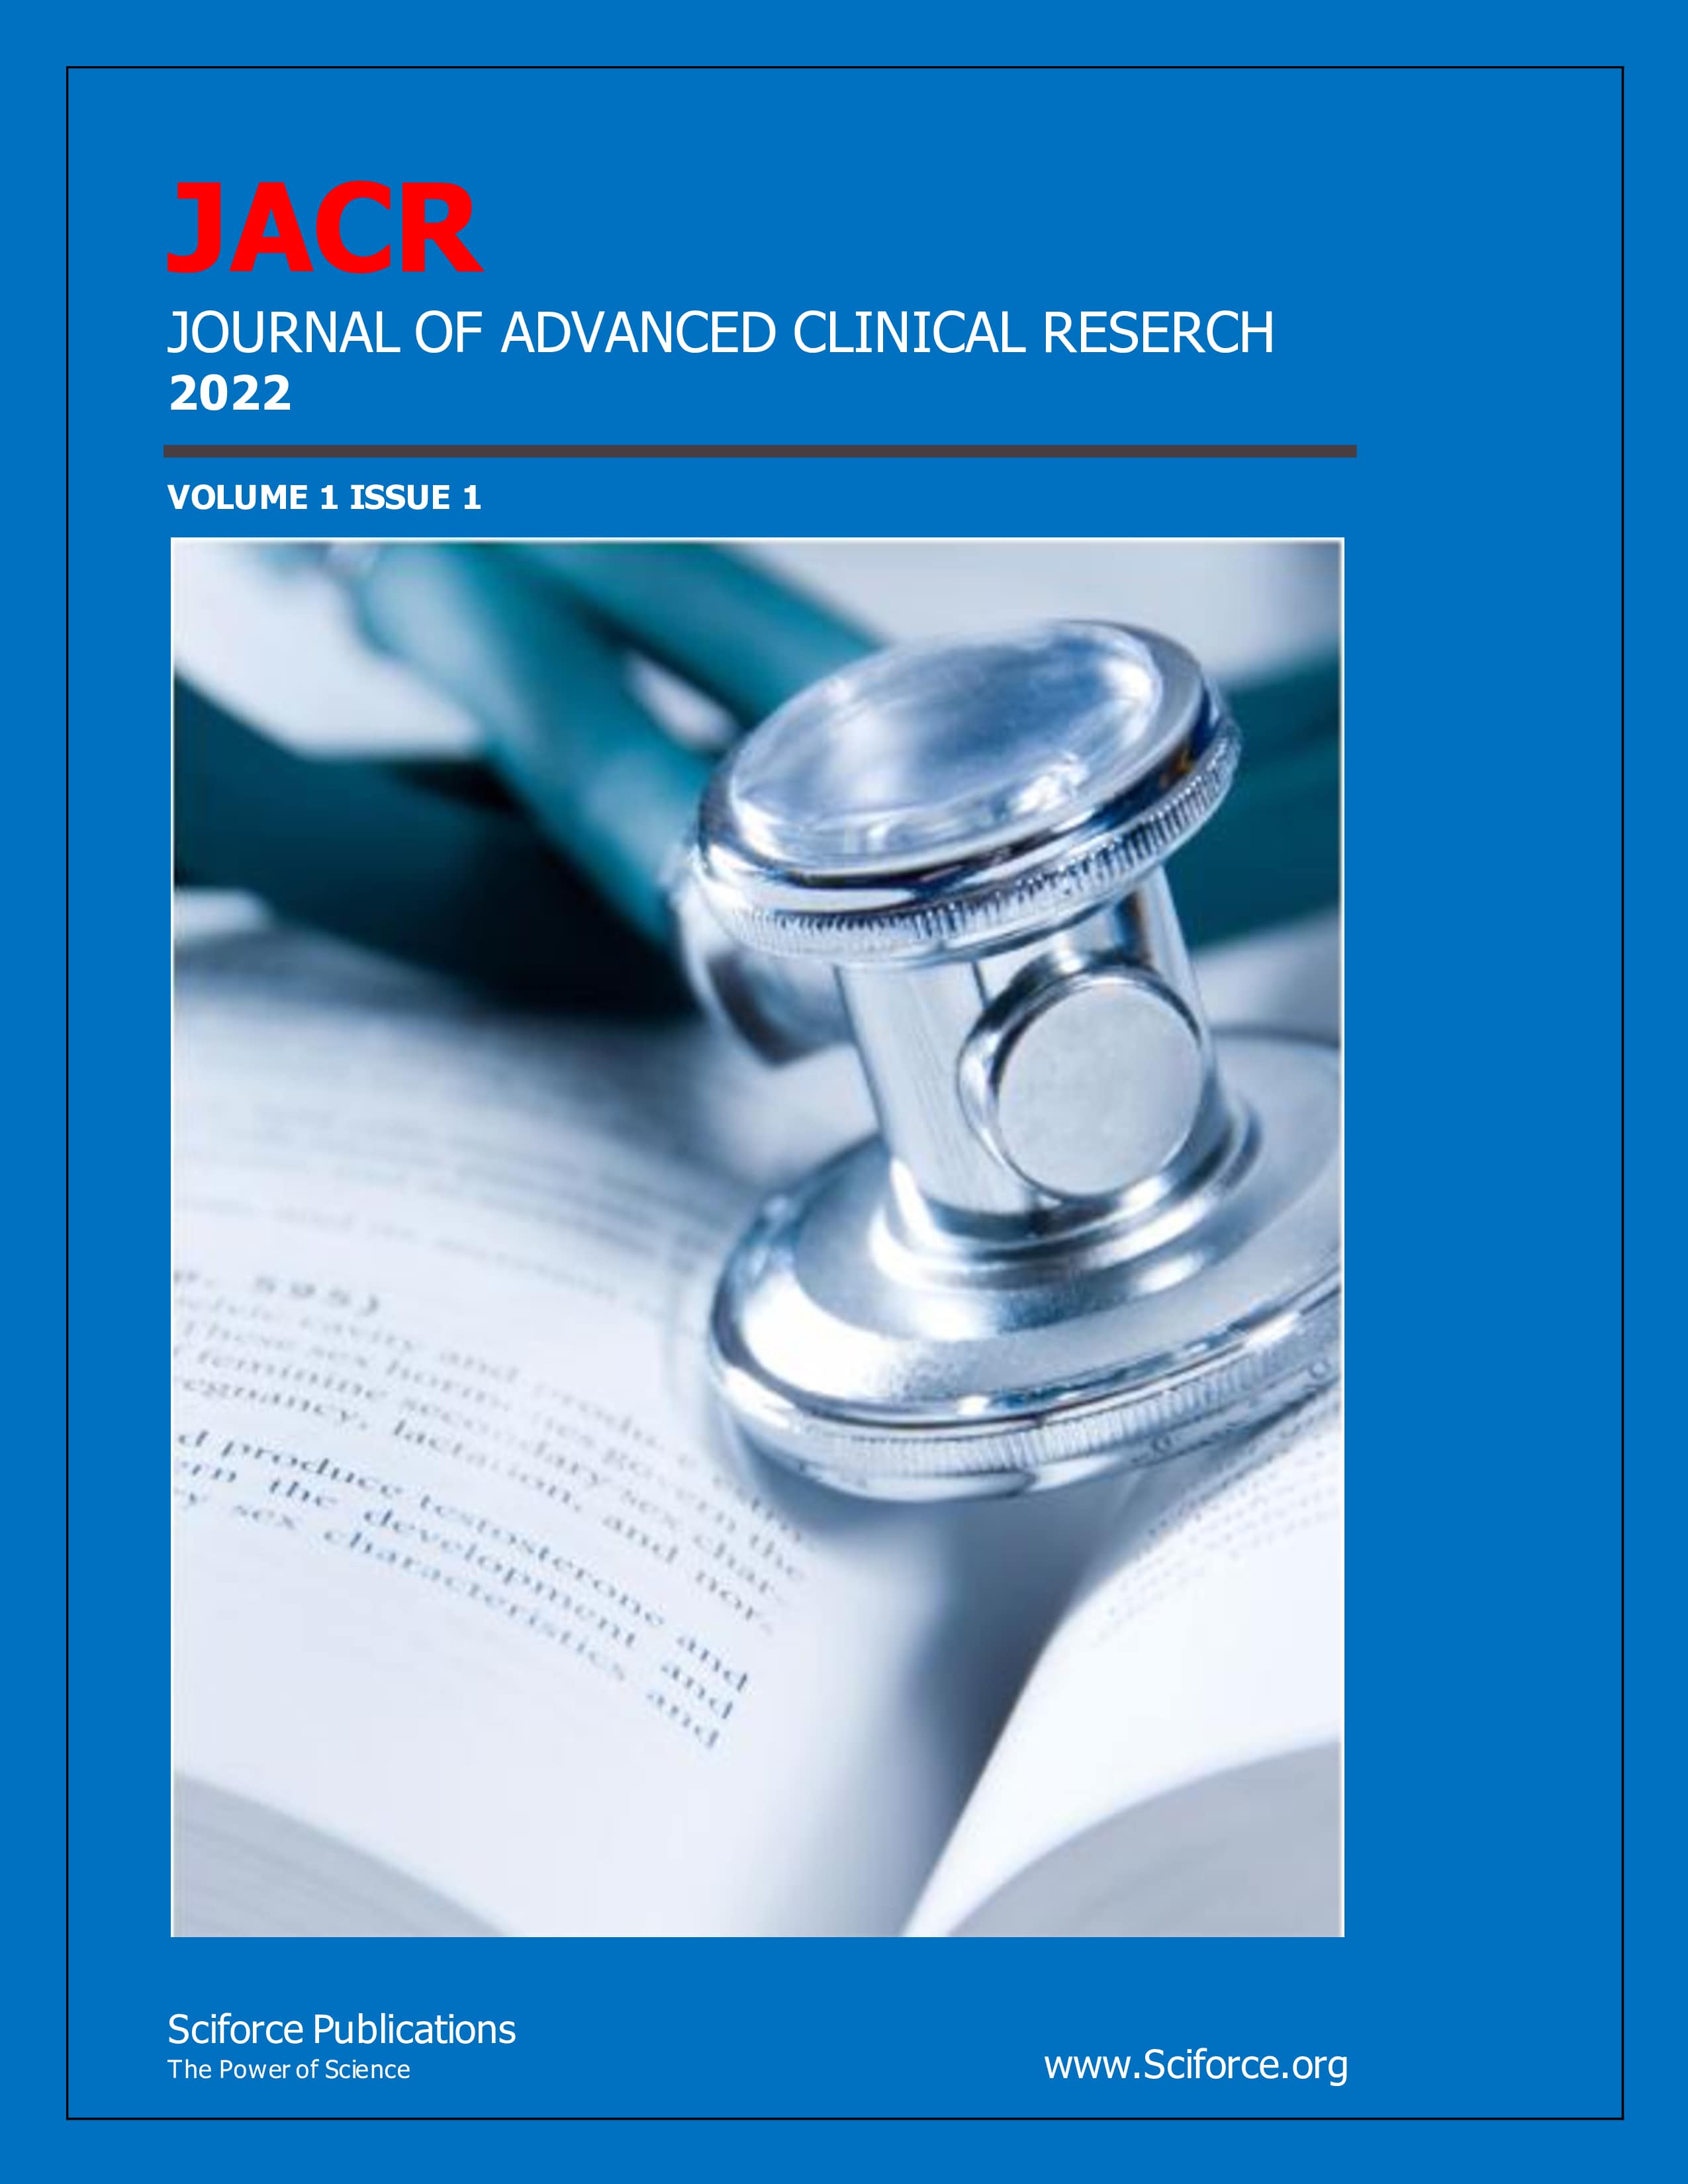 Journal Of Advanced Clinical Research